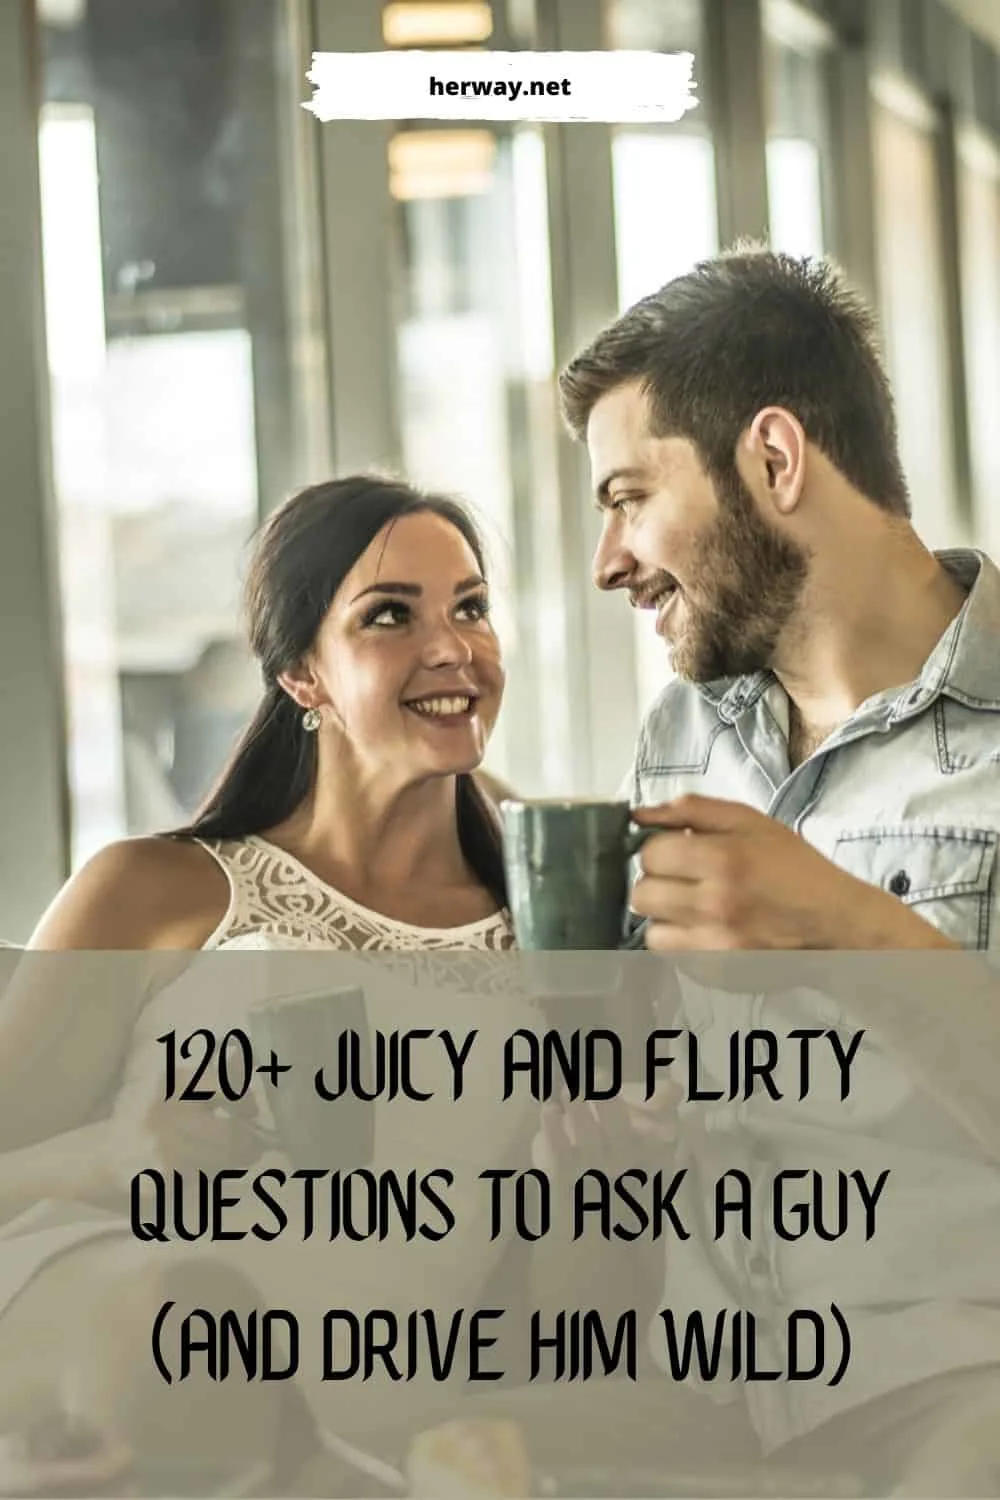 To 2022 questions of your list dating sister a best ask guy 153+ Fun